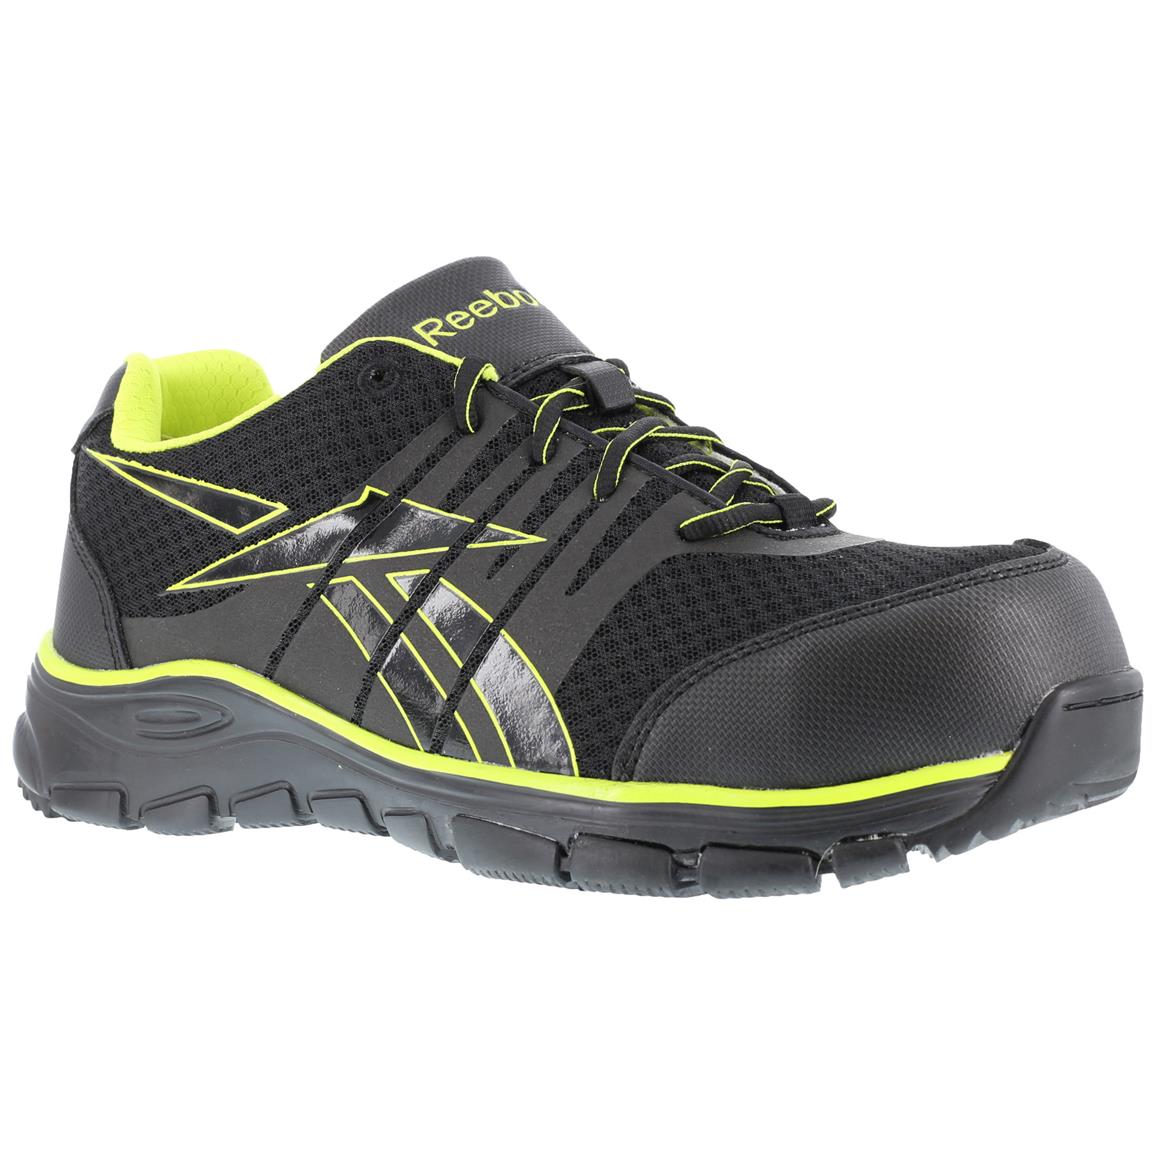 Reebok Arion Men's Composite Toe Work Shoes - 670925, Work Boots at ...